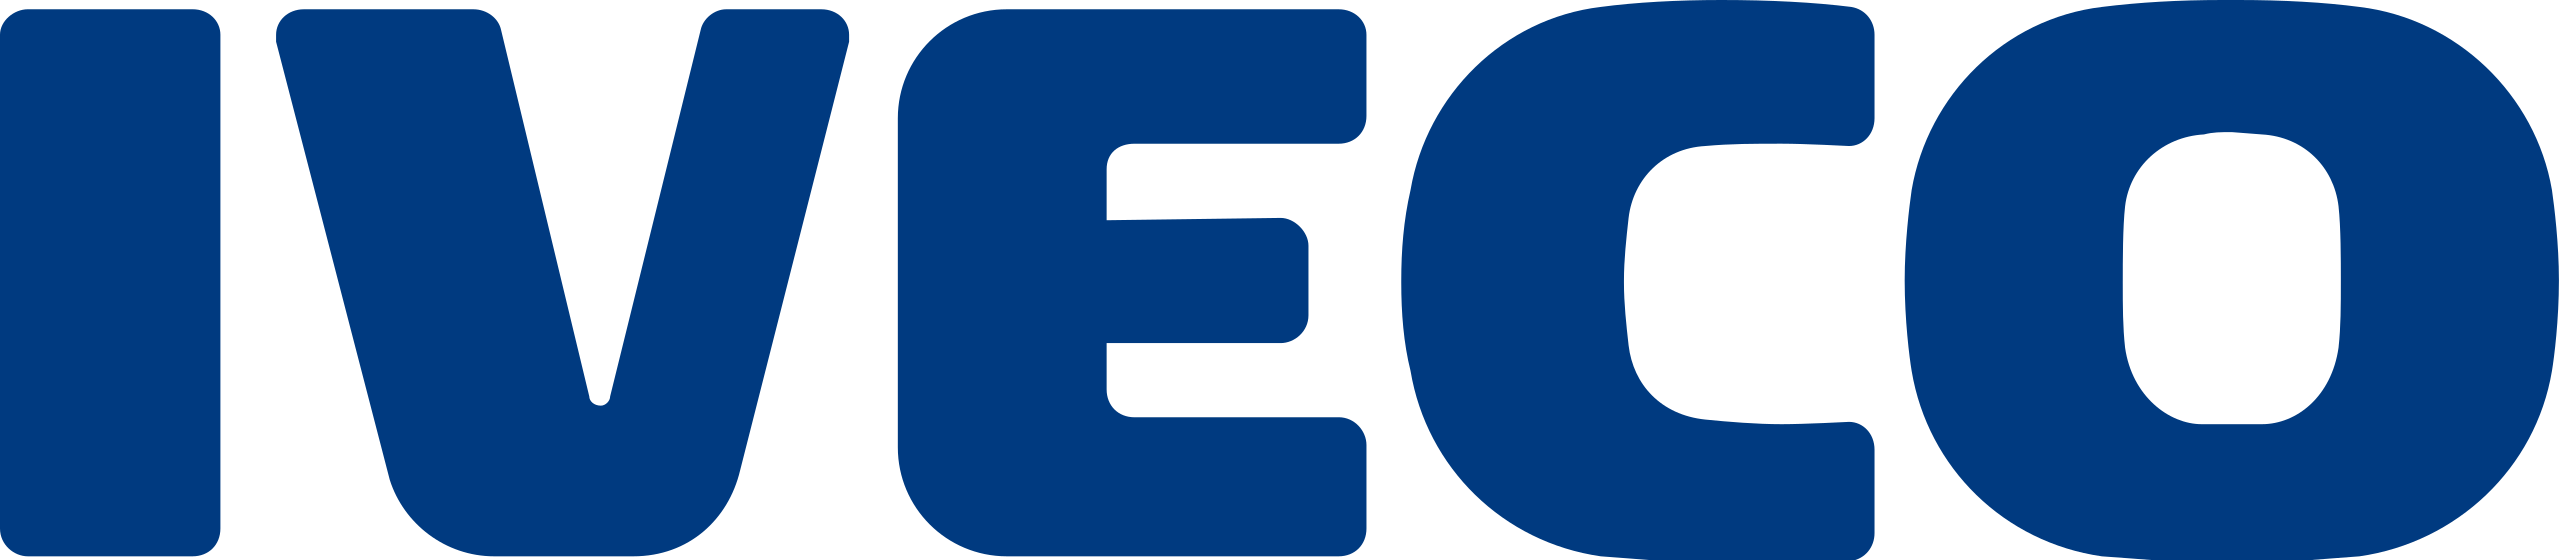 logo Iveco.png